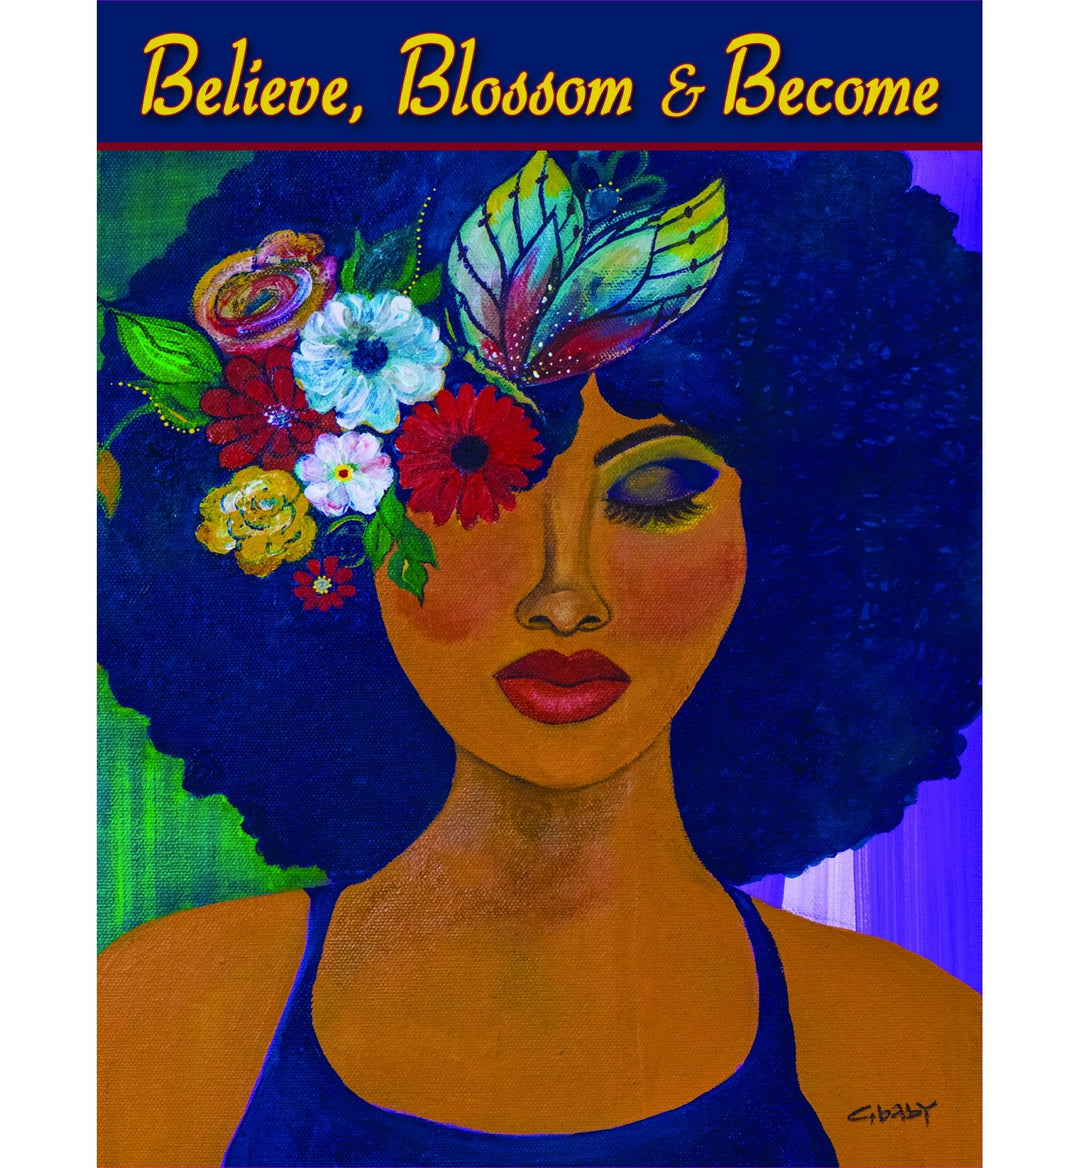 Believe, Blossom & Become: African American Note Card by GBaby